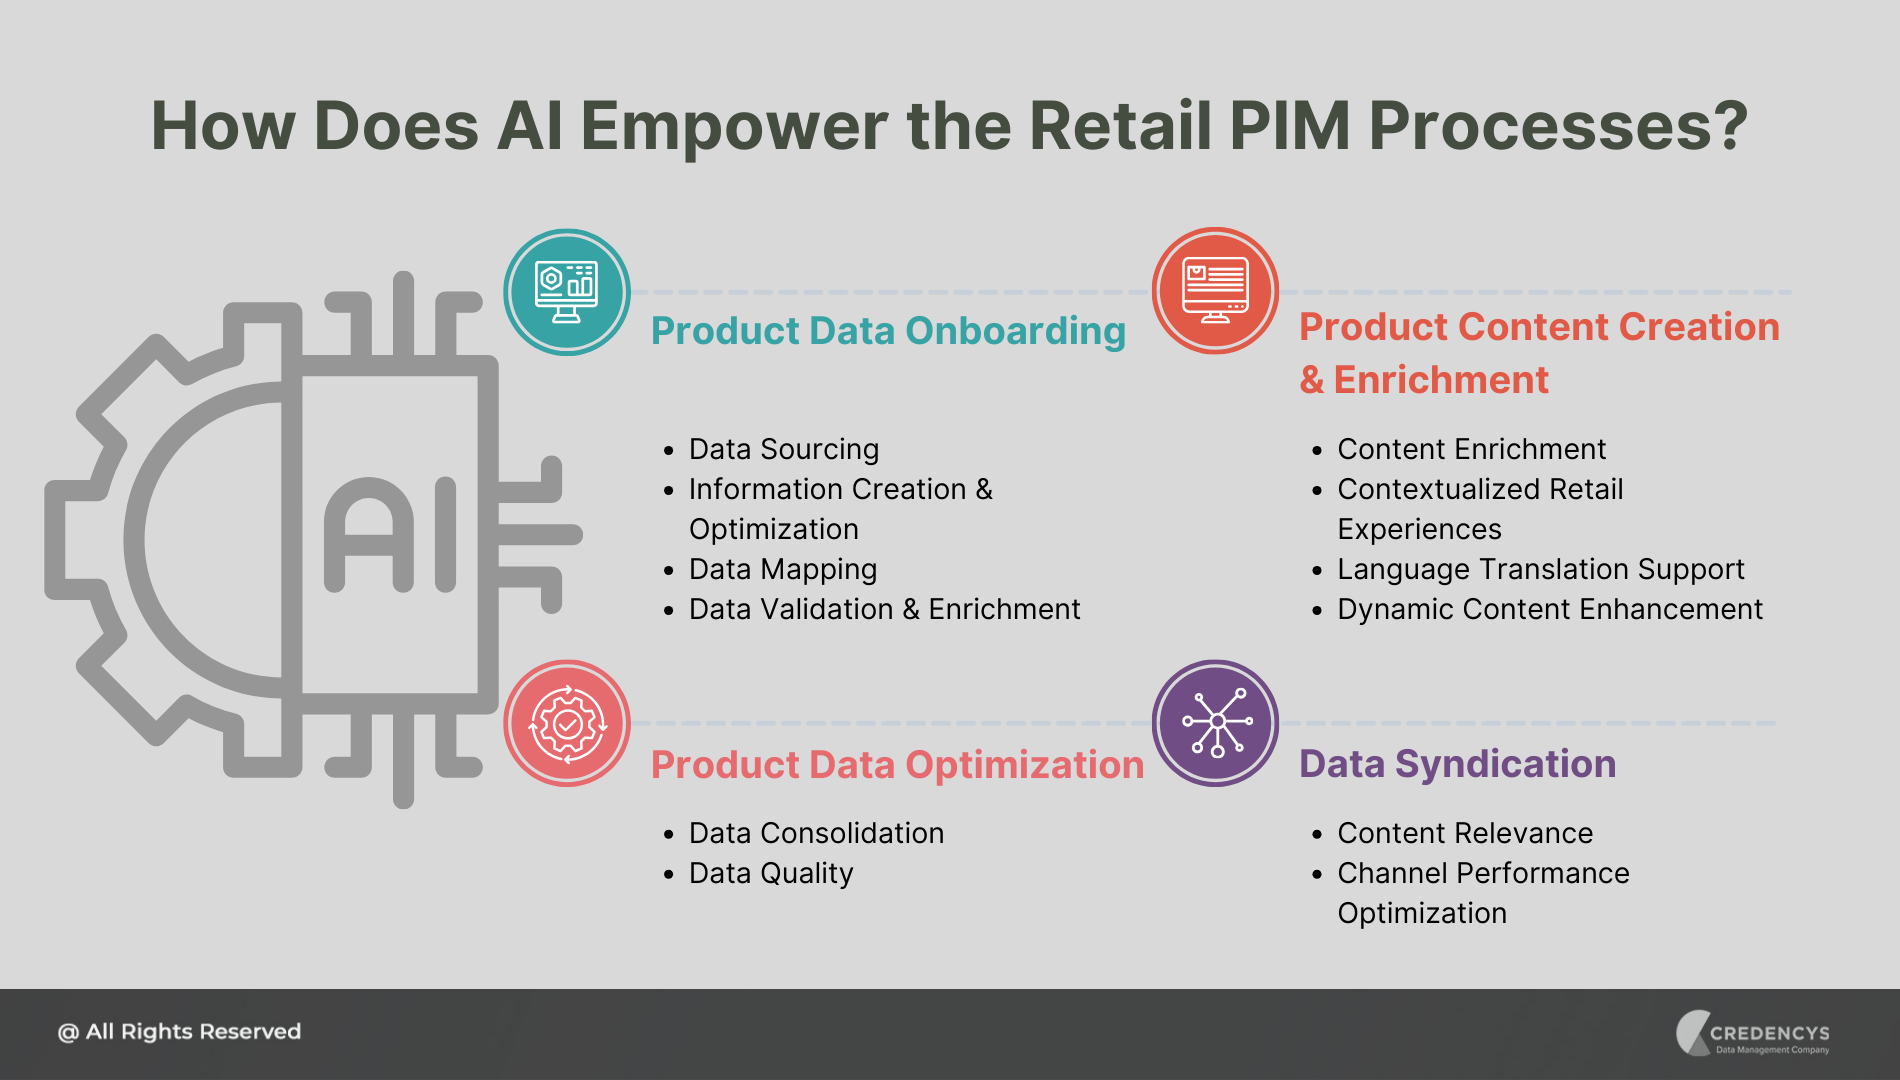 How Does AI Empower the Retail PIM Processes